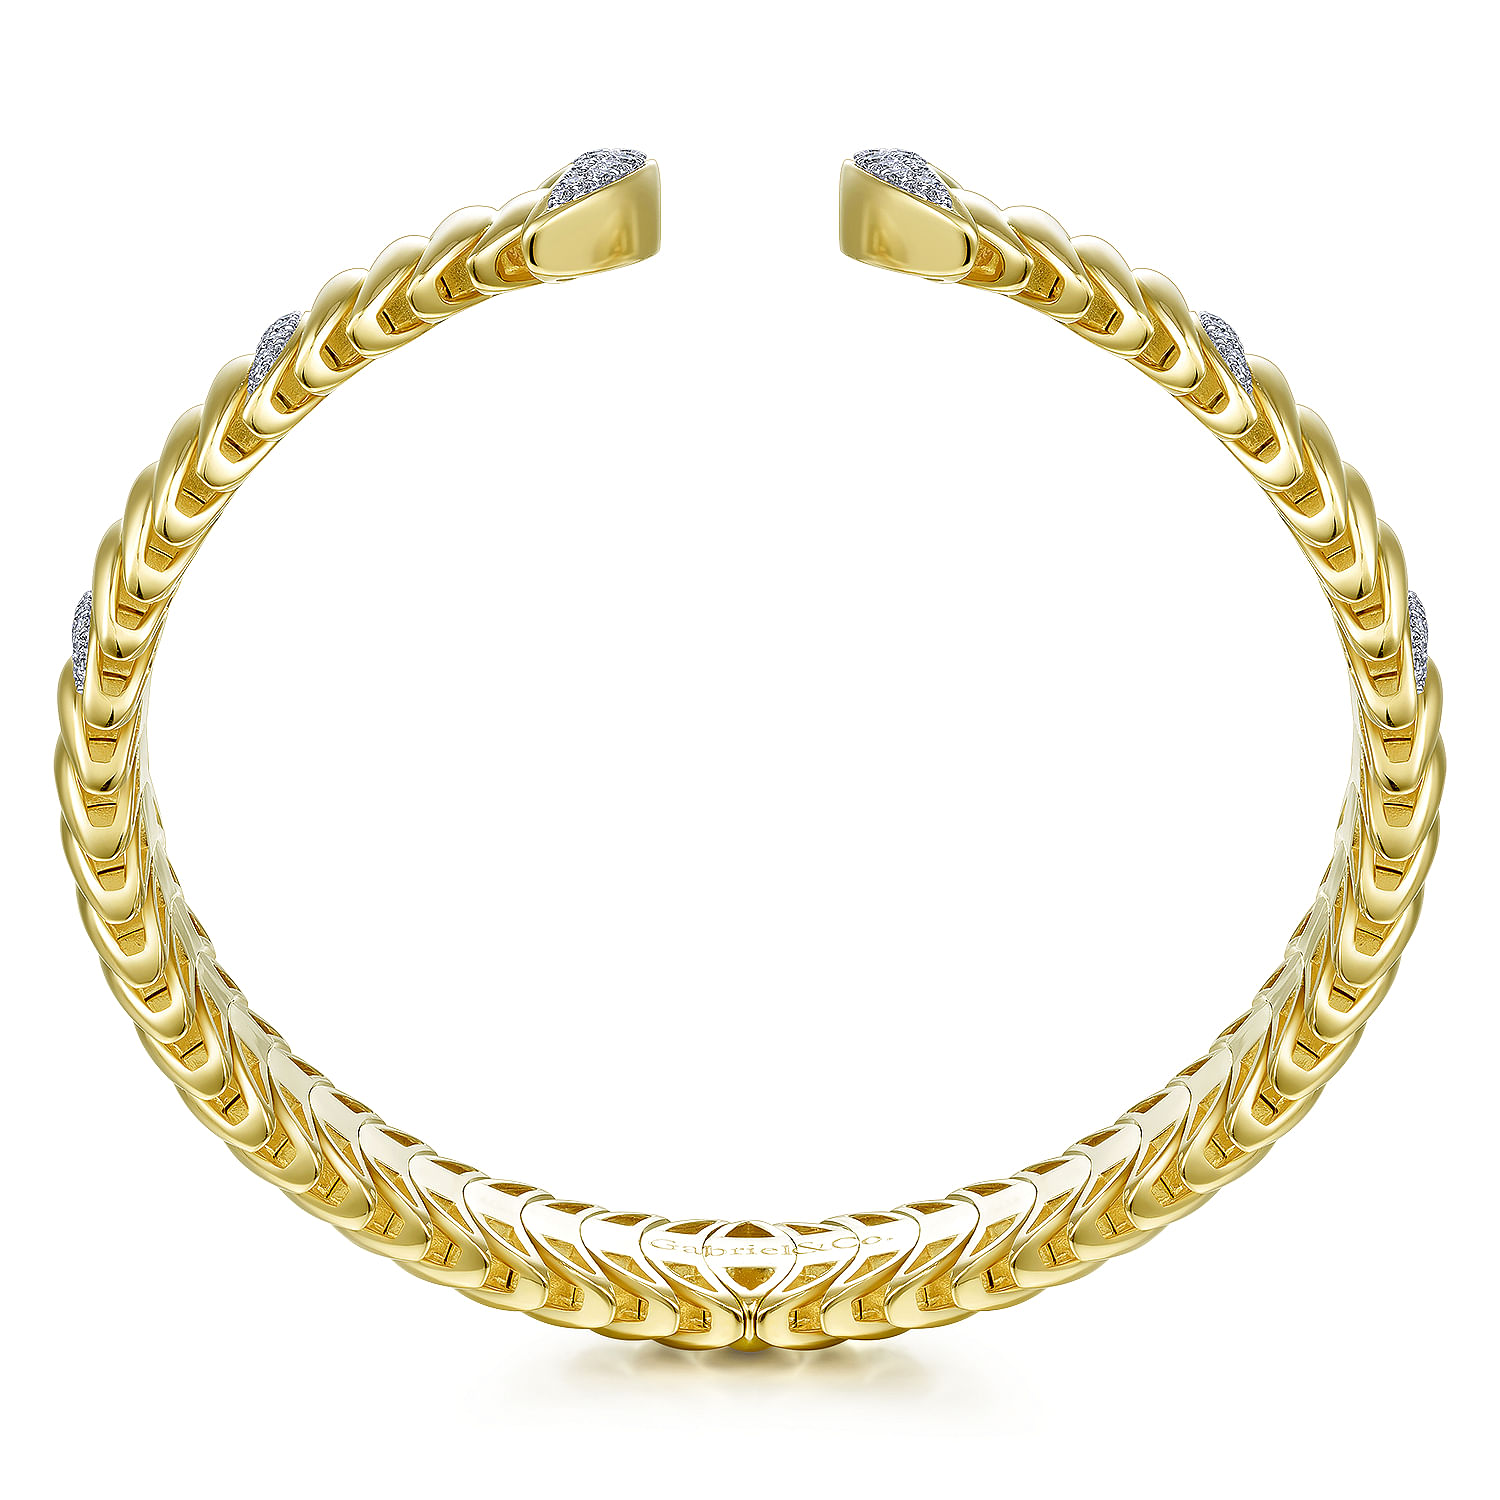 14K Yellow Gold Crescent Moon Open Cuff Bracelet with Diamond Pavé Stations